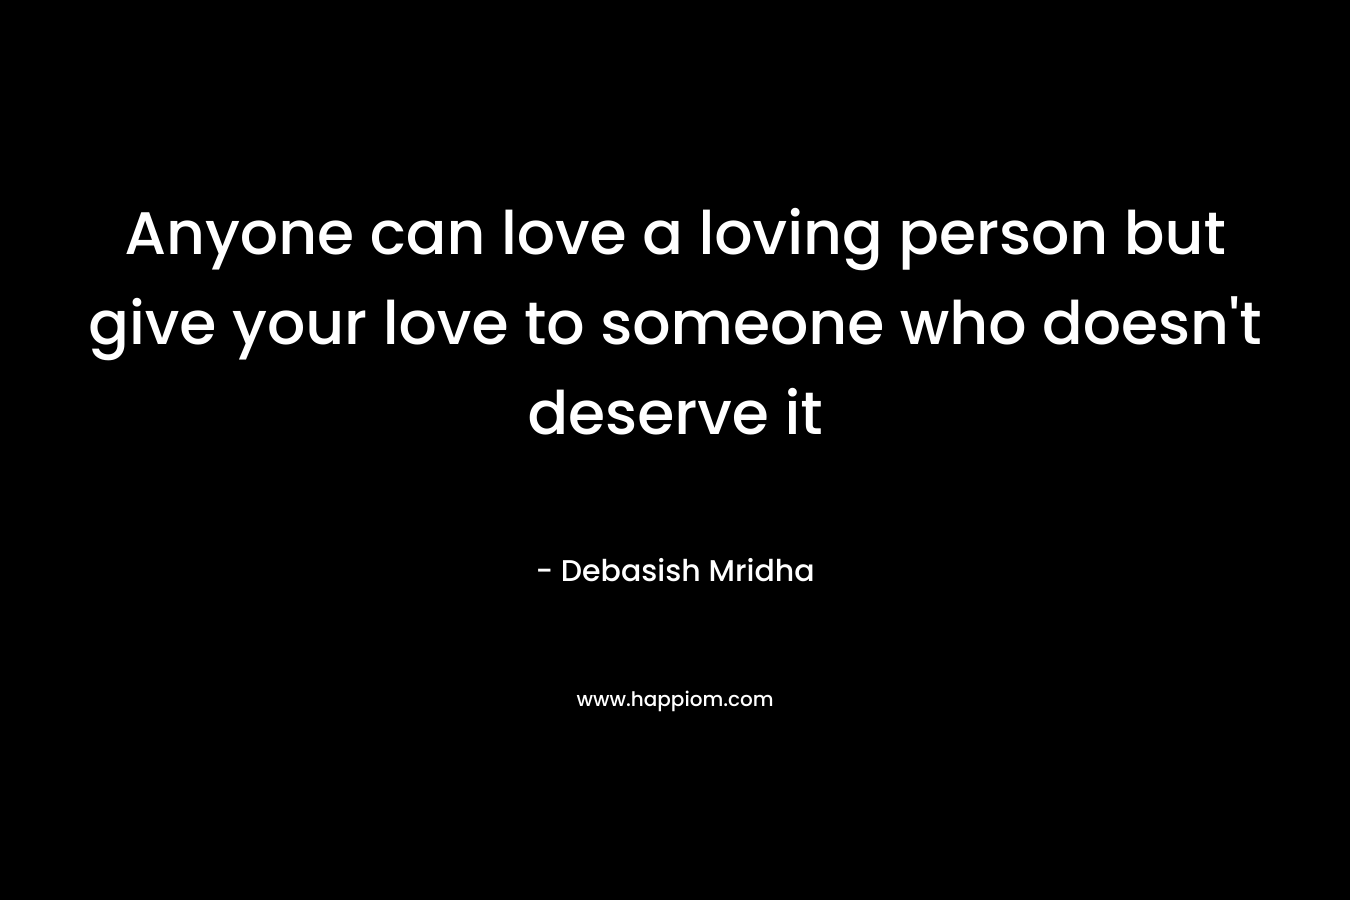 Anyone can love a loving person but give your love to someone who doesn't deserve it